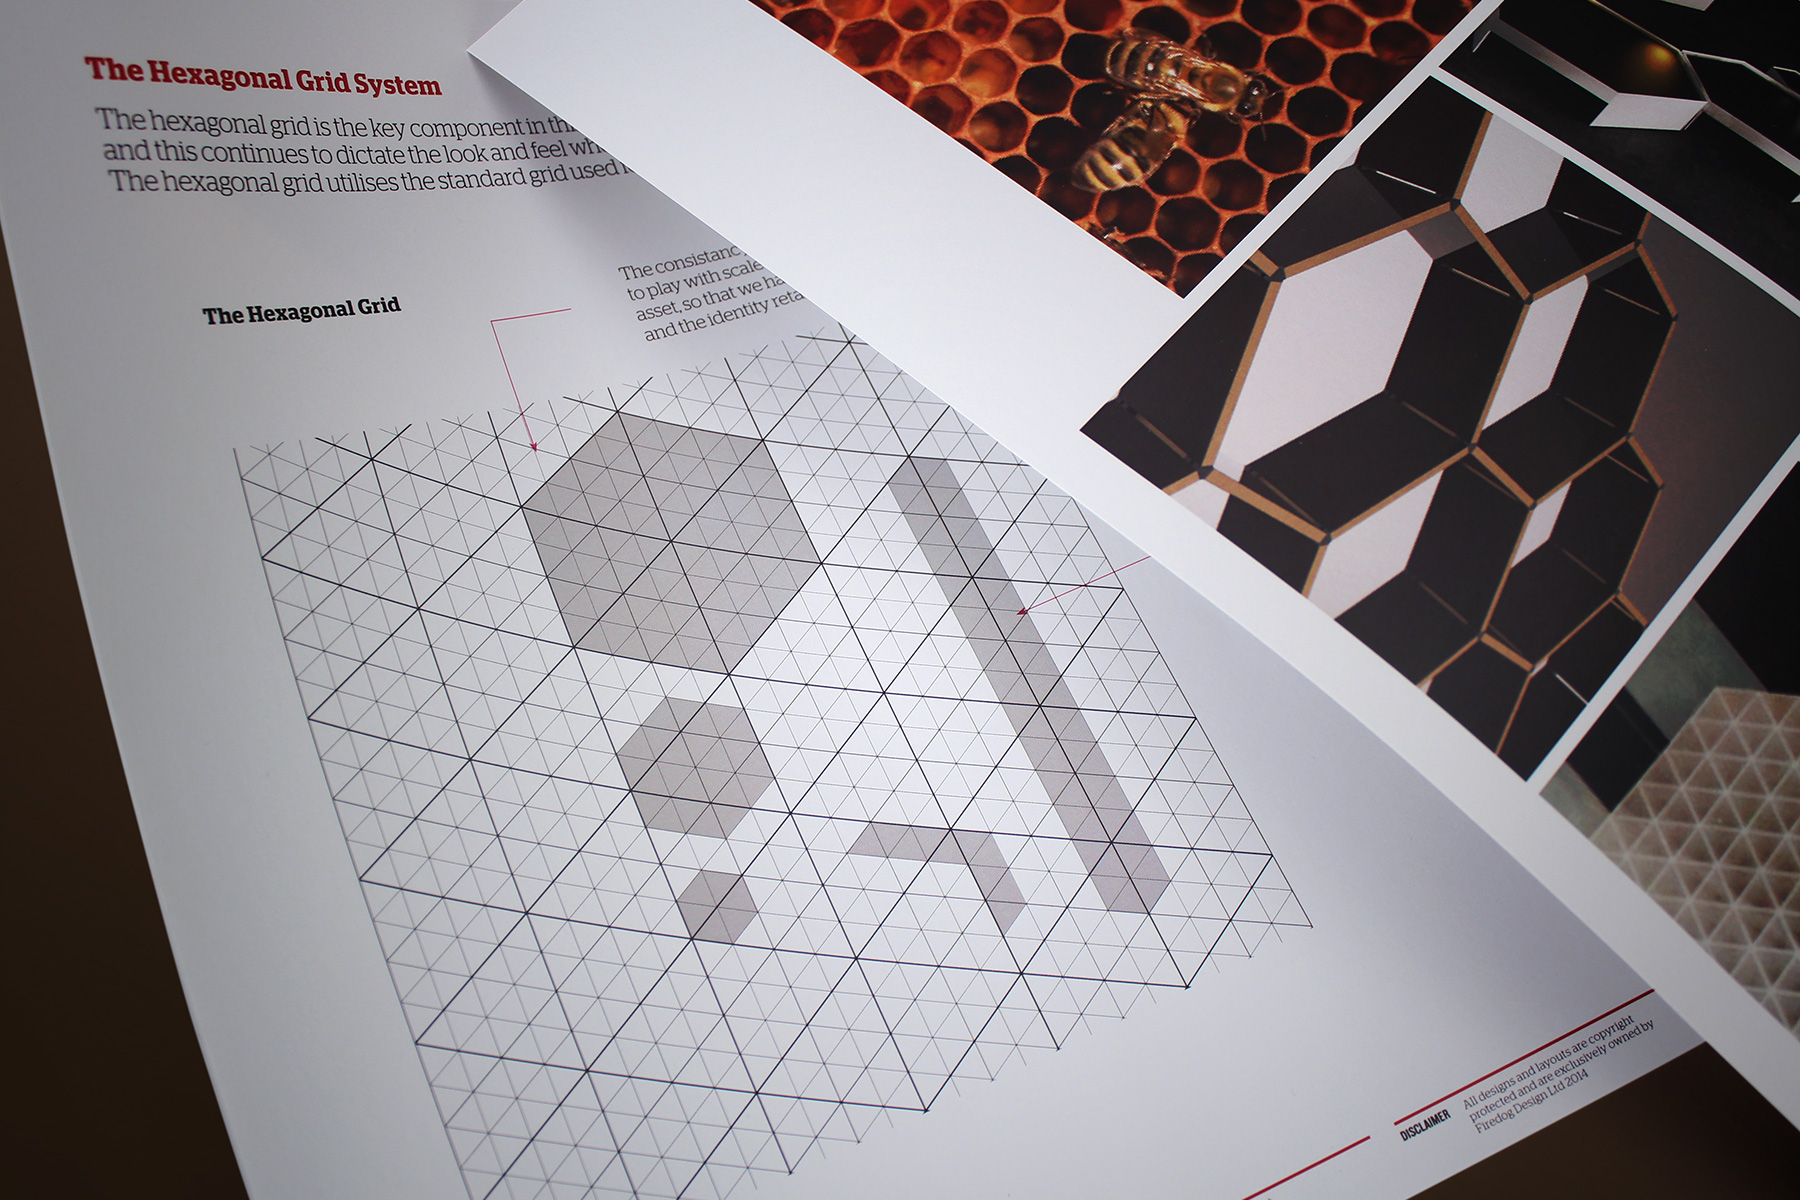 We created a flexible hexagonal grid which constrained the identity to particular angles, forms and functions.